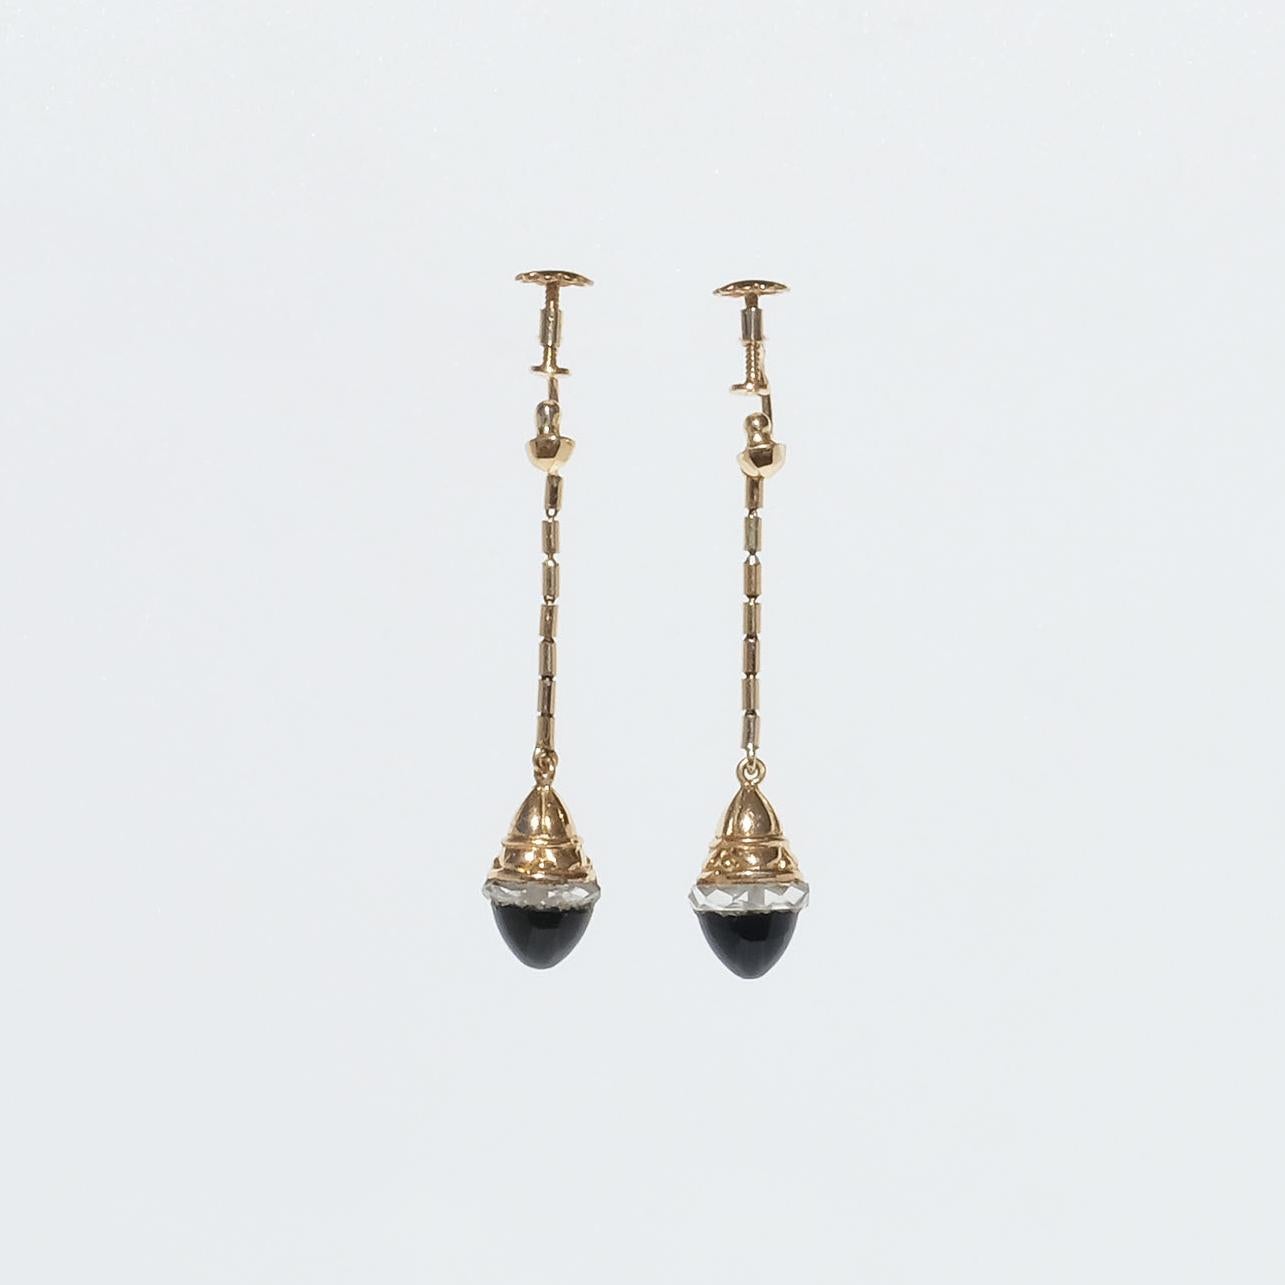 These 18 karat gold earrings are adorned with cabochon cut onyx-stones and a border of old-cut glass. The pendants dangle beautifully on a 20 mm long golden bamboo link chain. To keep the earrings in place they have, as many of the earrings had